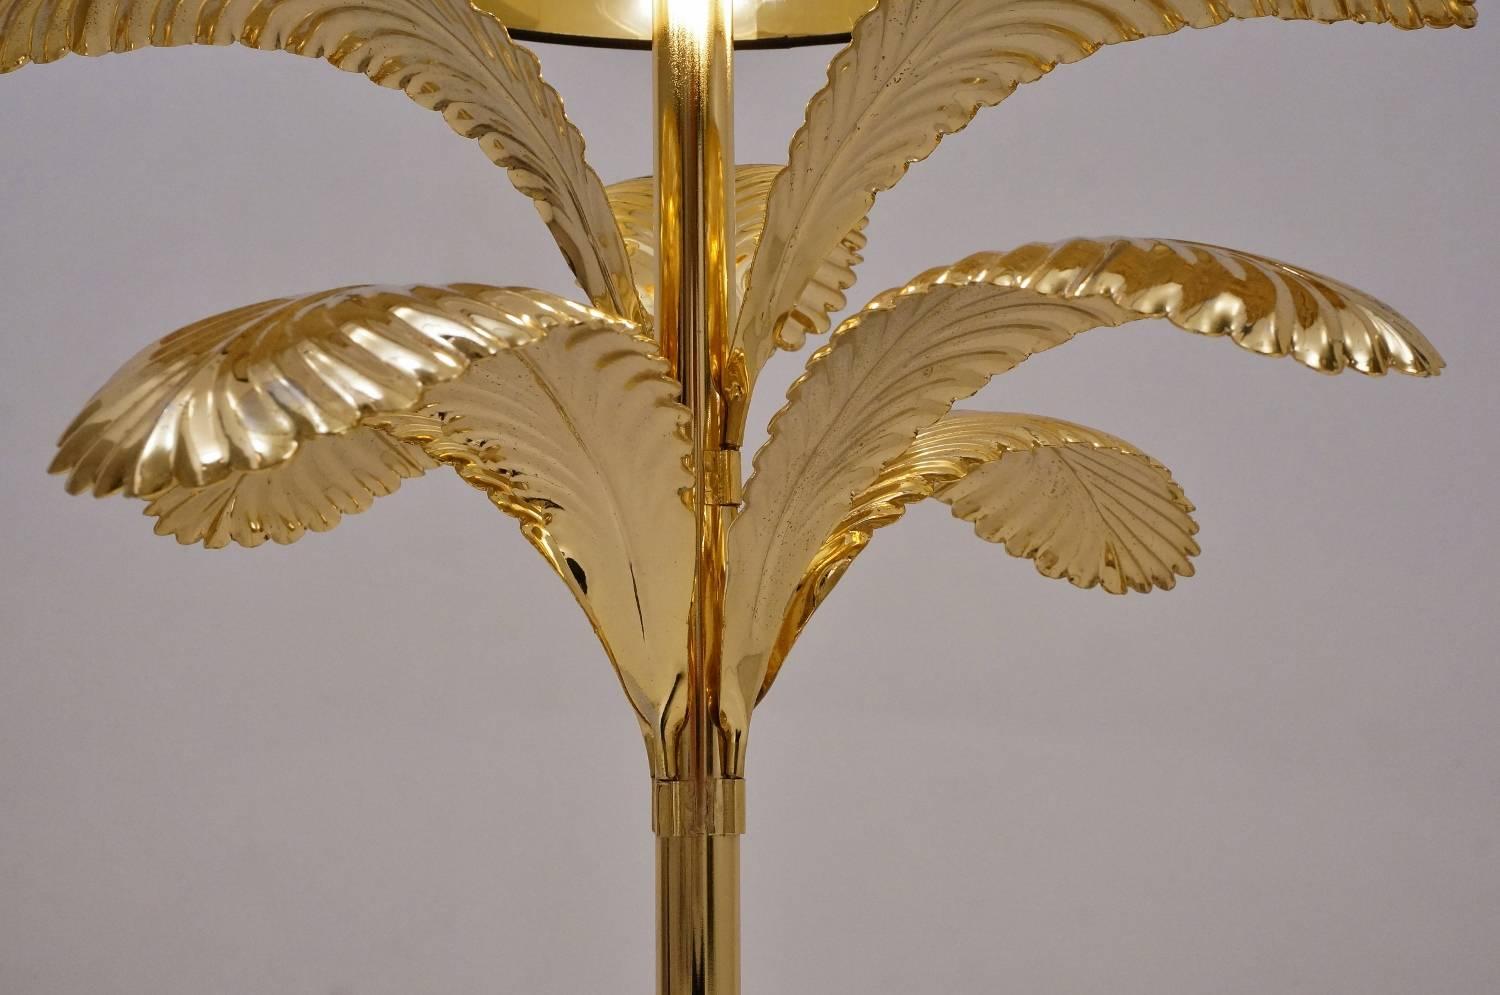 Palm tree table lamp in the style of Hans Kögl, circa 1980s, German.

This lamp has been thoroughly cleaned respecting the vintage patina. It has been newly rewired and earthed with new brass lamp holder, gold toned silk cable, new black plug and